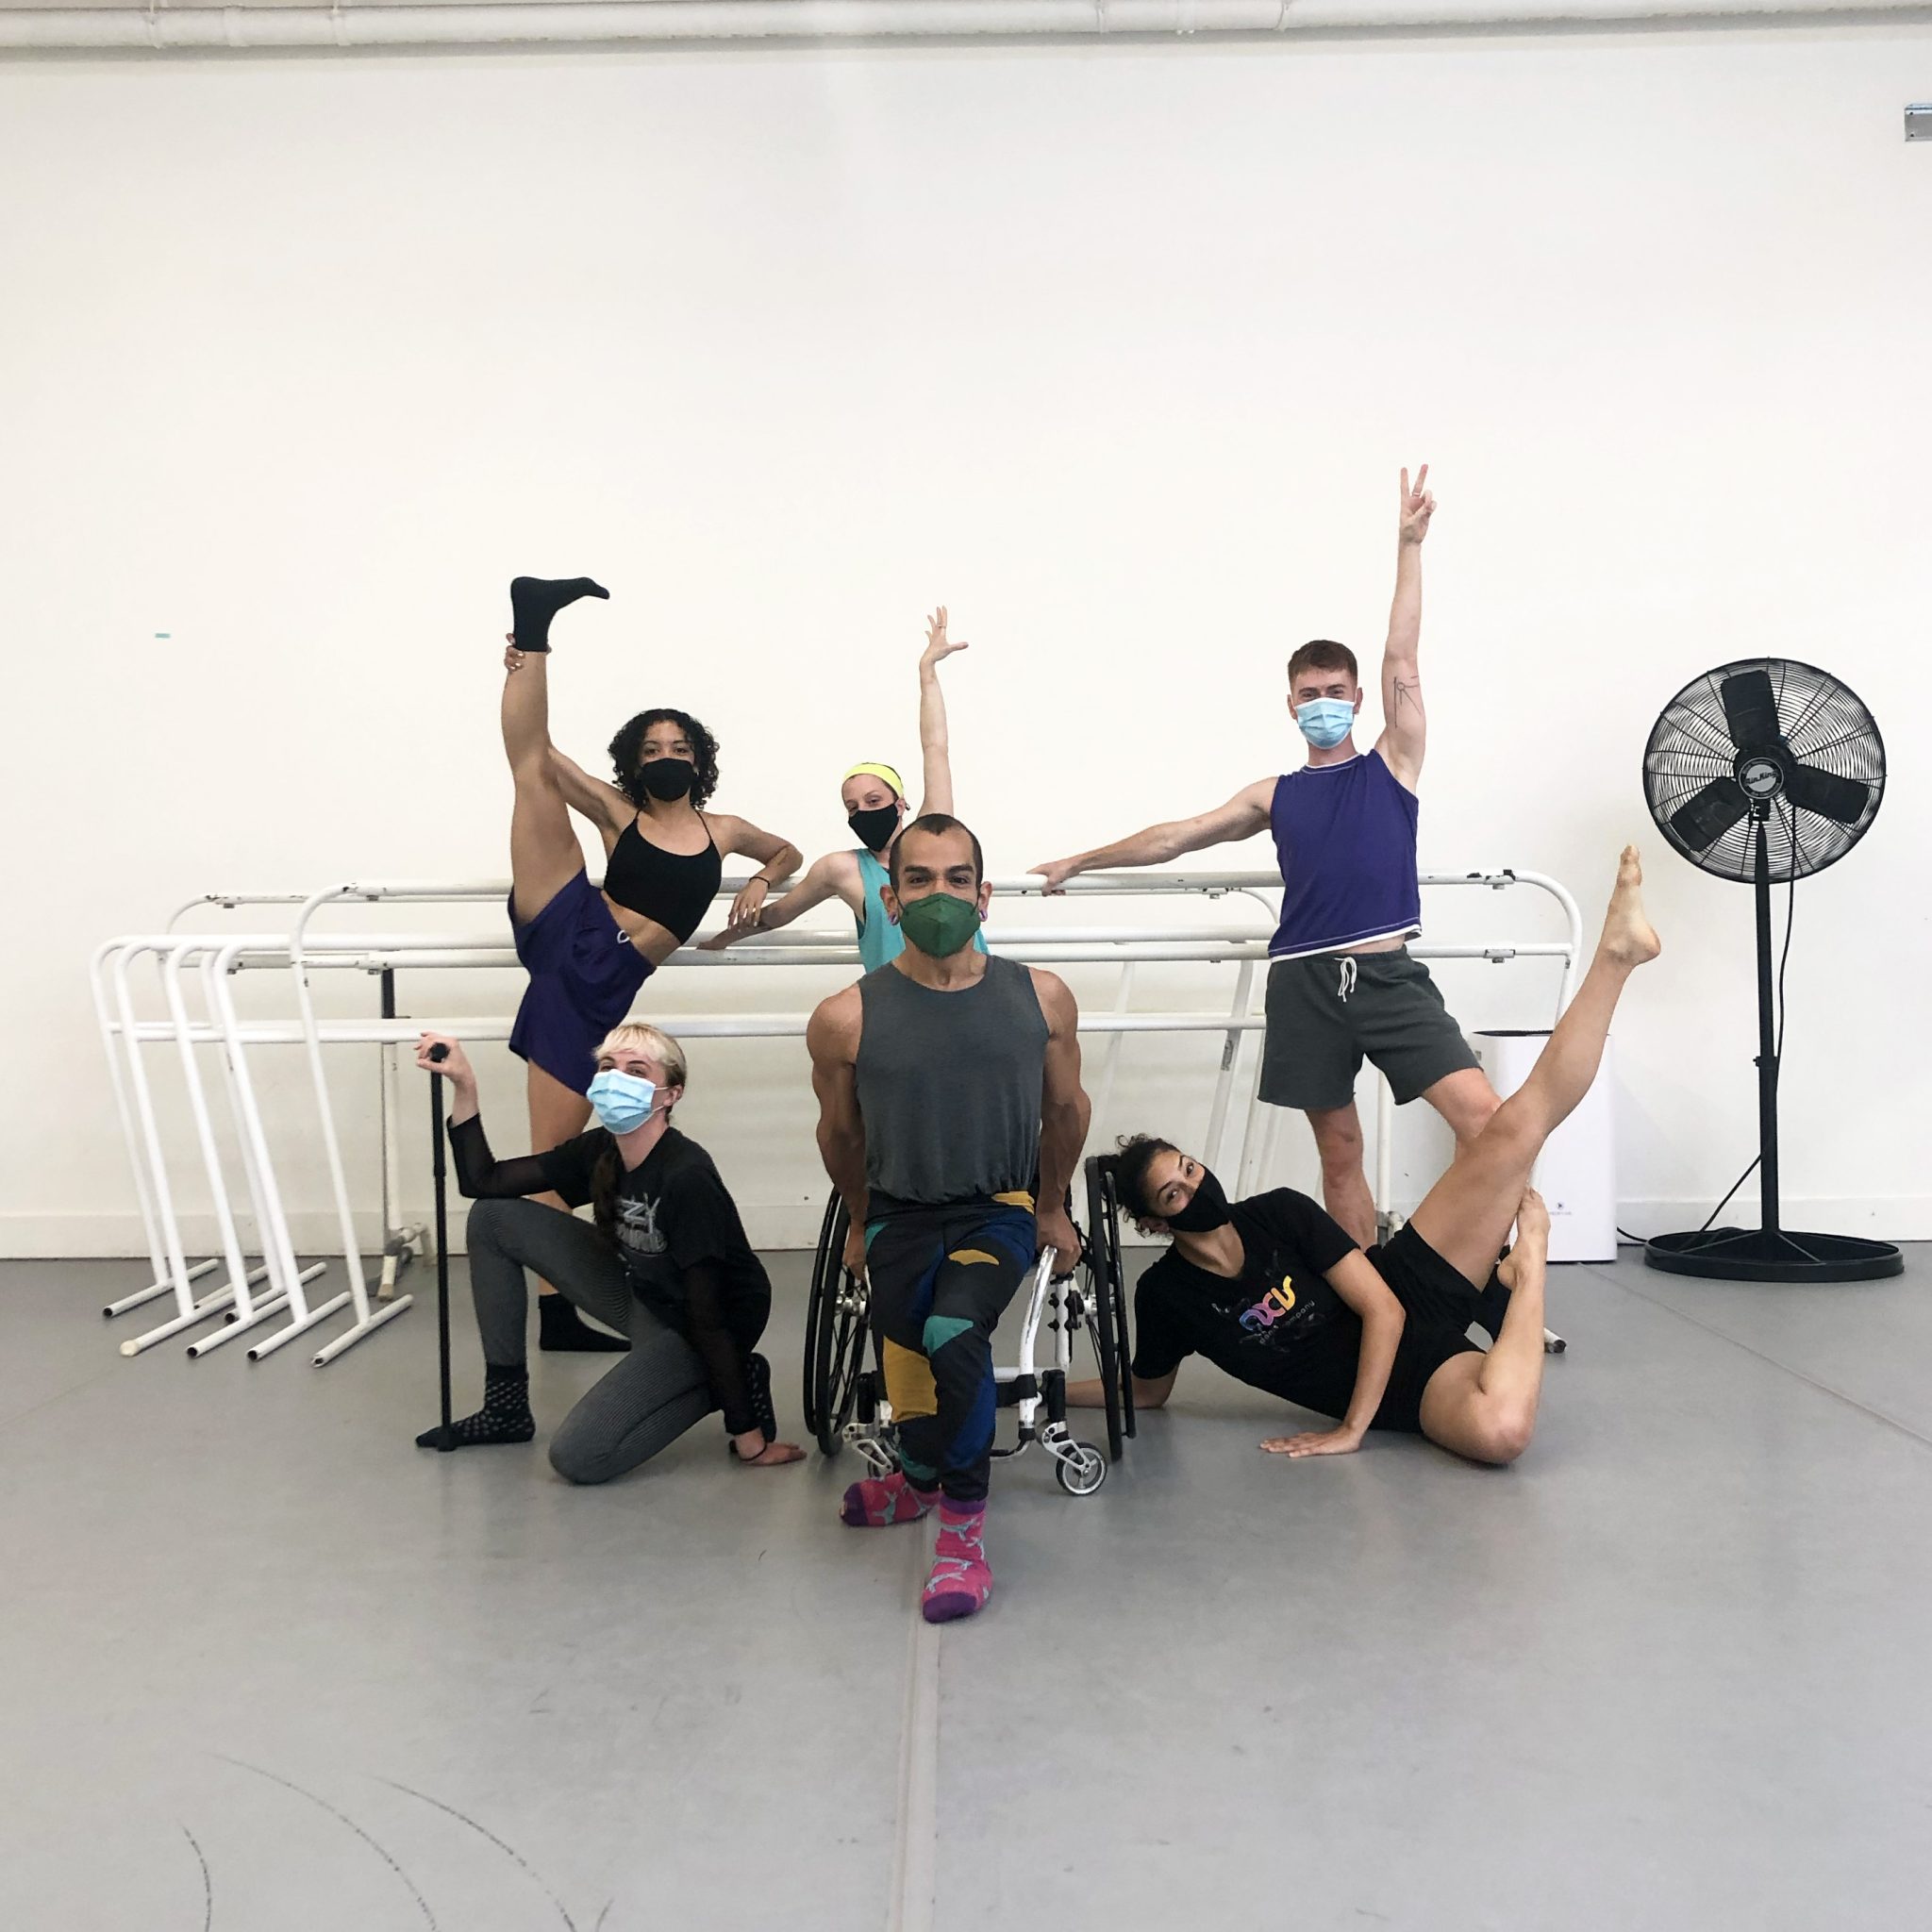 The AXIS Dancers form a tableu: In the center, Janpi lifts themself on their wheelchair, Dawn and Zara pose in their sides with Alaka, Louisa and David in the back.